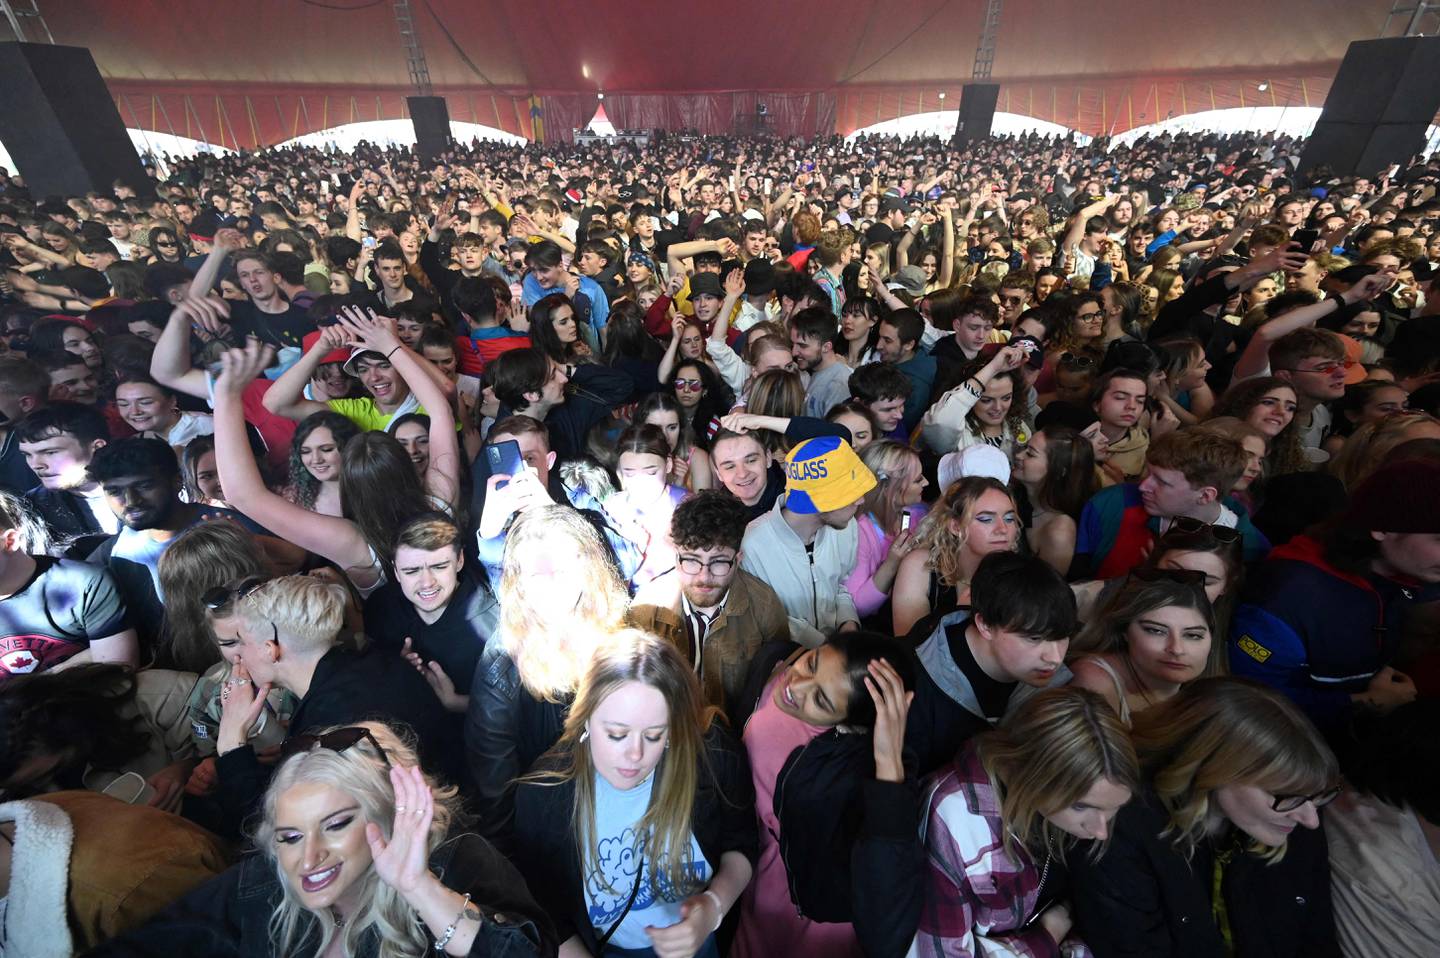 Concert-goers watch The Lathums perform at a live music concert hosted by Festival Republic in Sefton Park in Liverpool, north-west England on May 2, 2021, where a non-socially-distanced crowd of 5,000 are expected to attend. - A pilot programme to examine ways of putting on events in a post-covid-19 world will include a concert by the band Blossoms which will do away with social distancing, though audience members will have to provide proof of a negative coronavirus test before gaining entry. (Photo by Paul ELLIS / AFP)